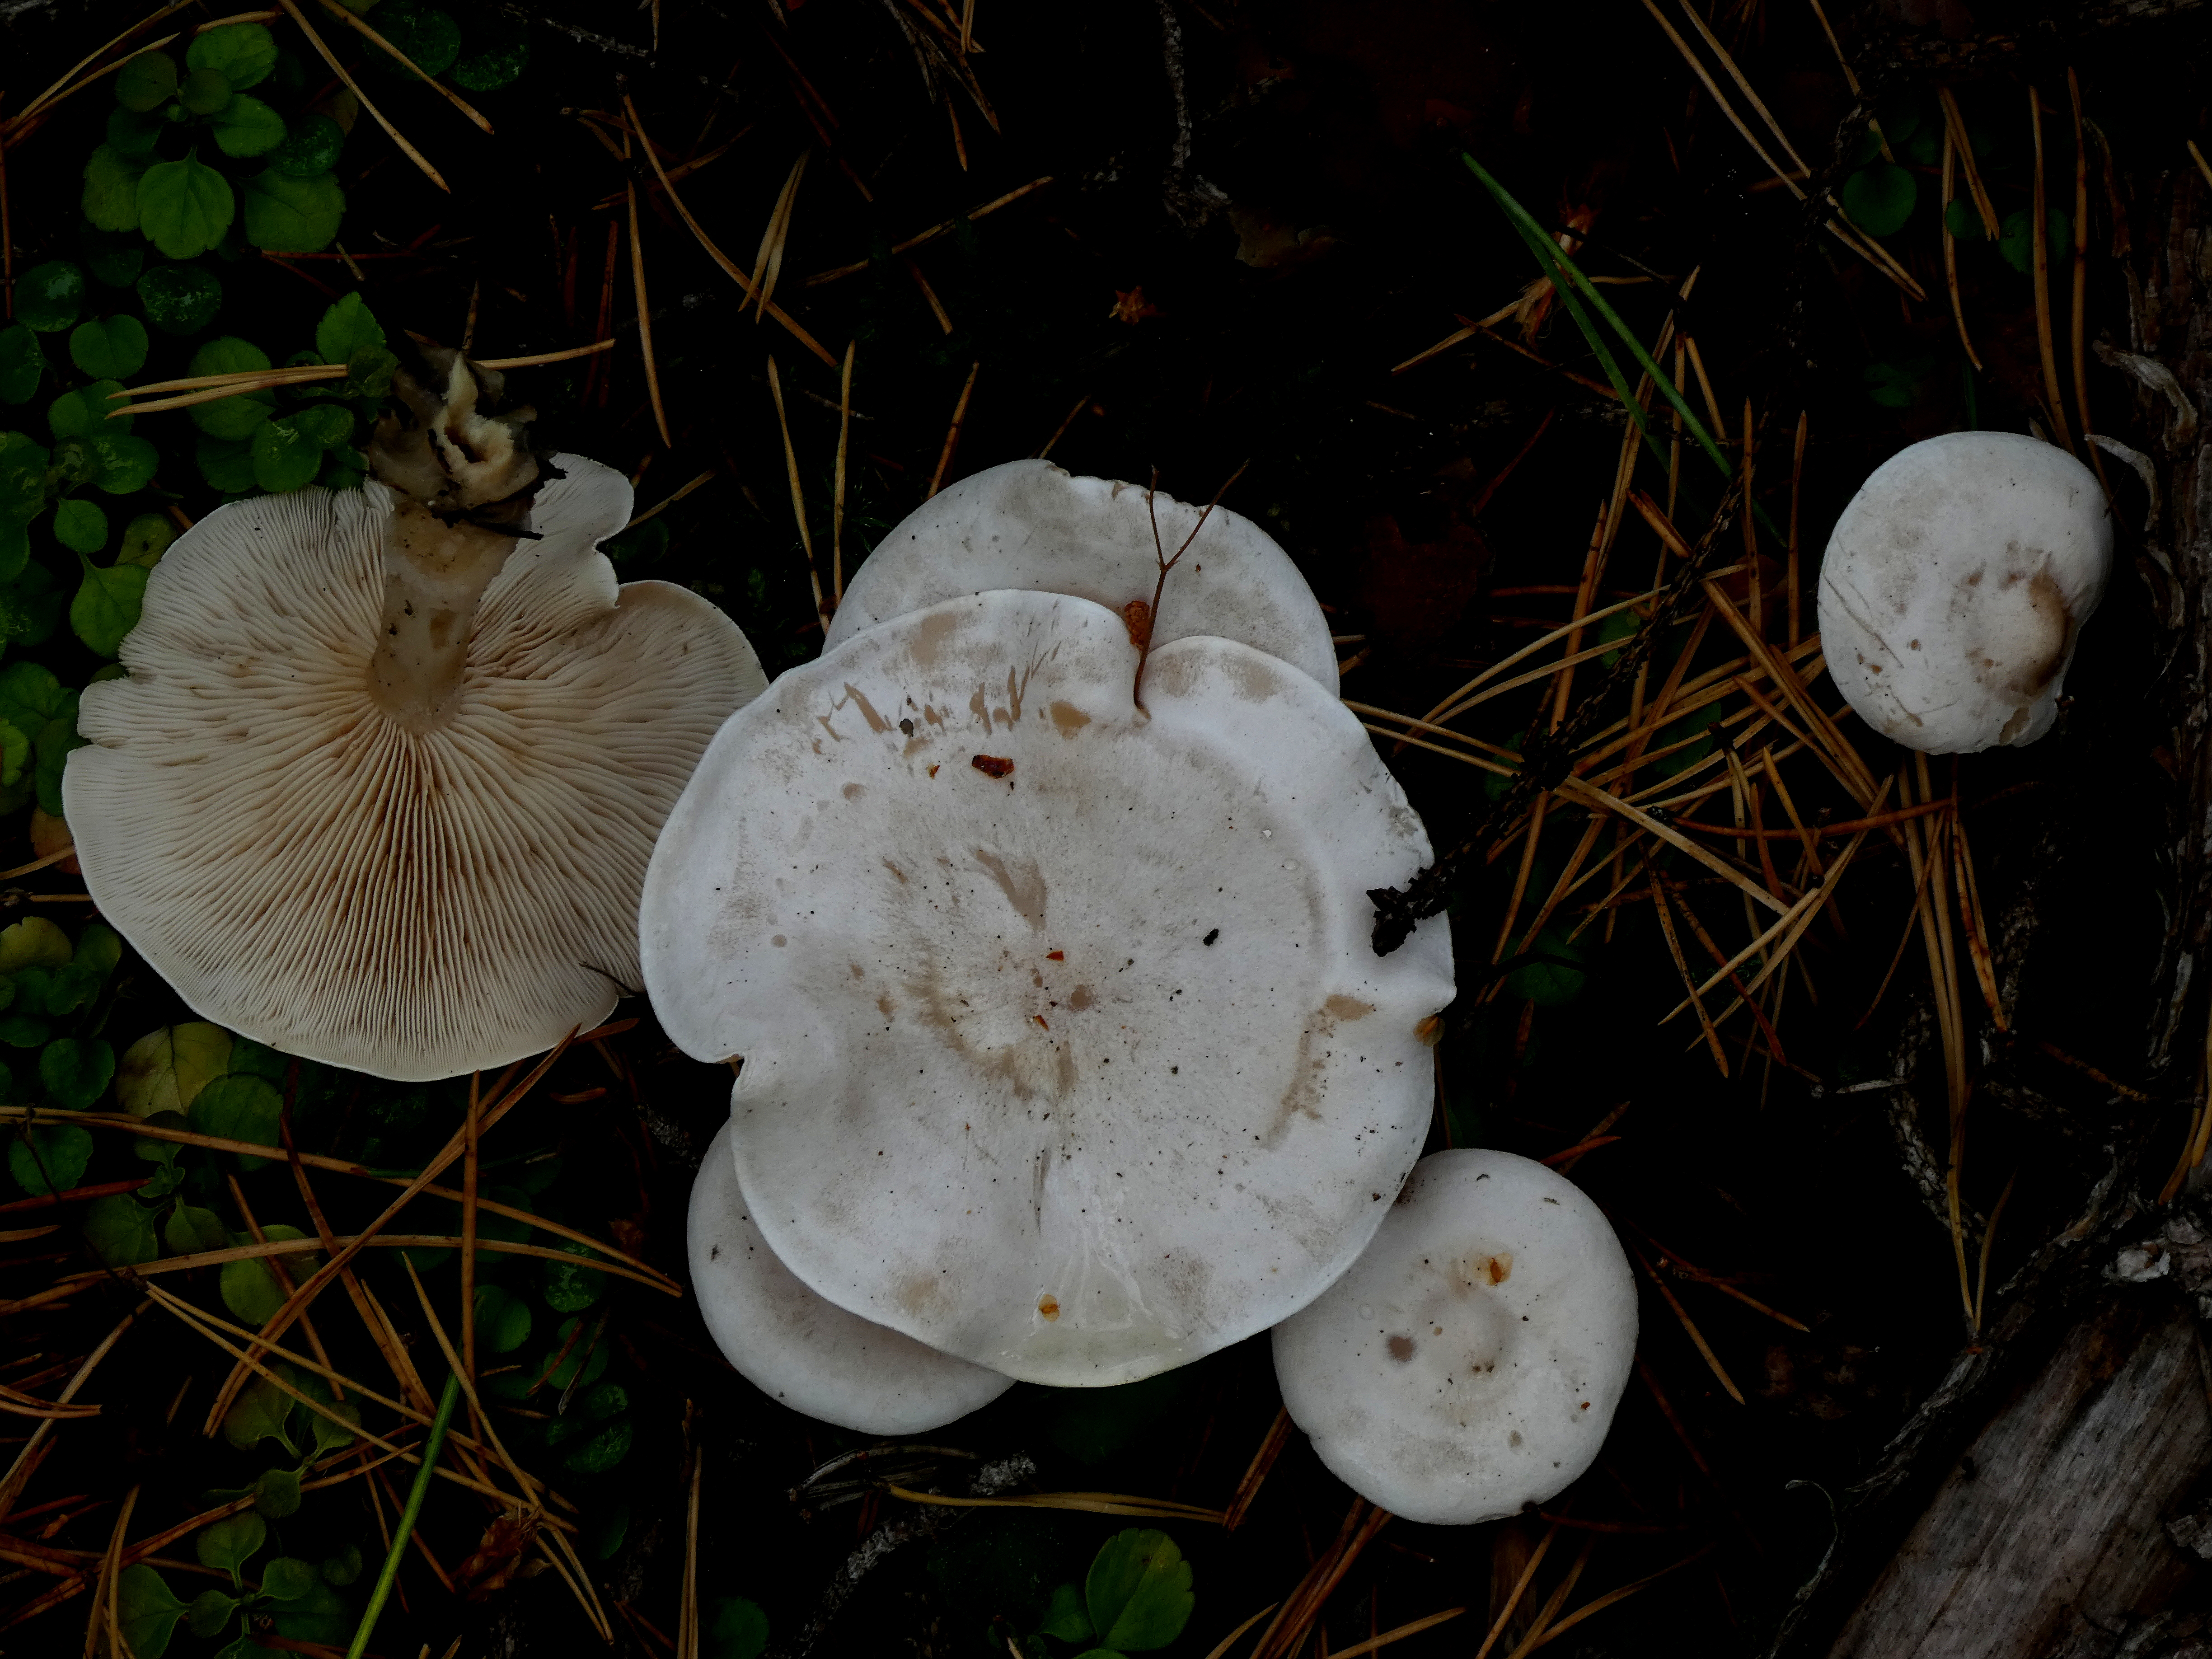 Clitocybe candicans